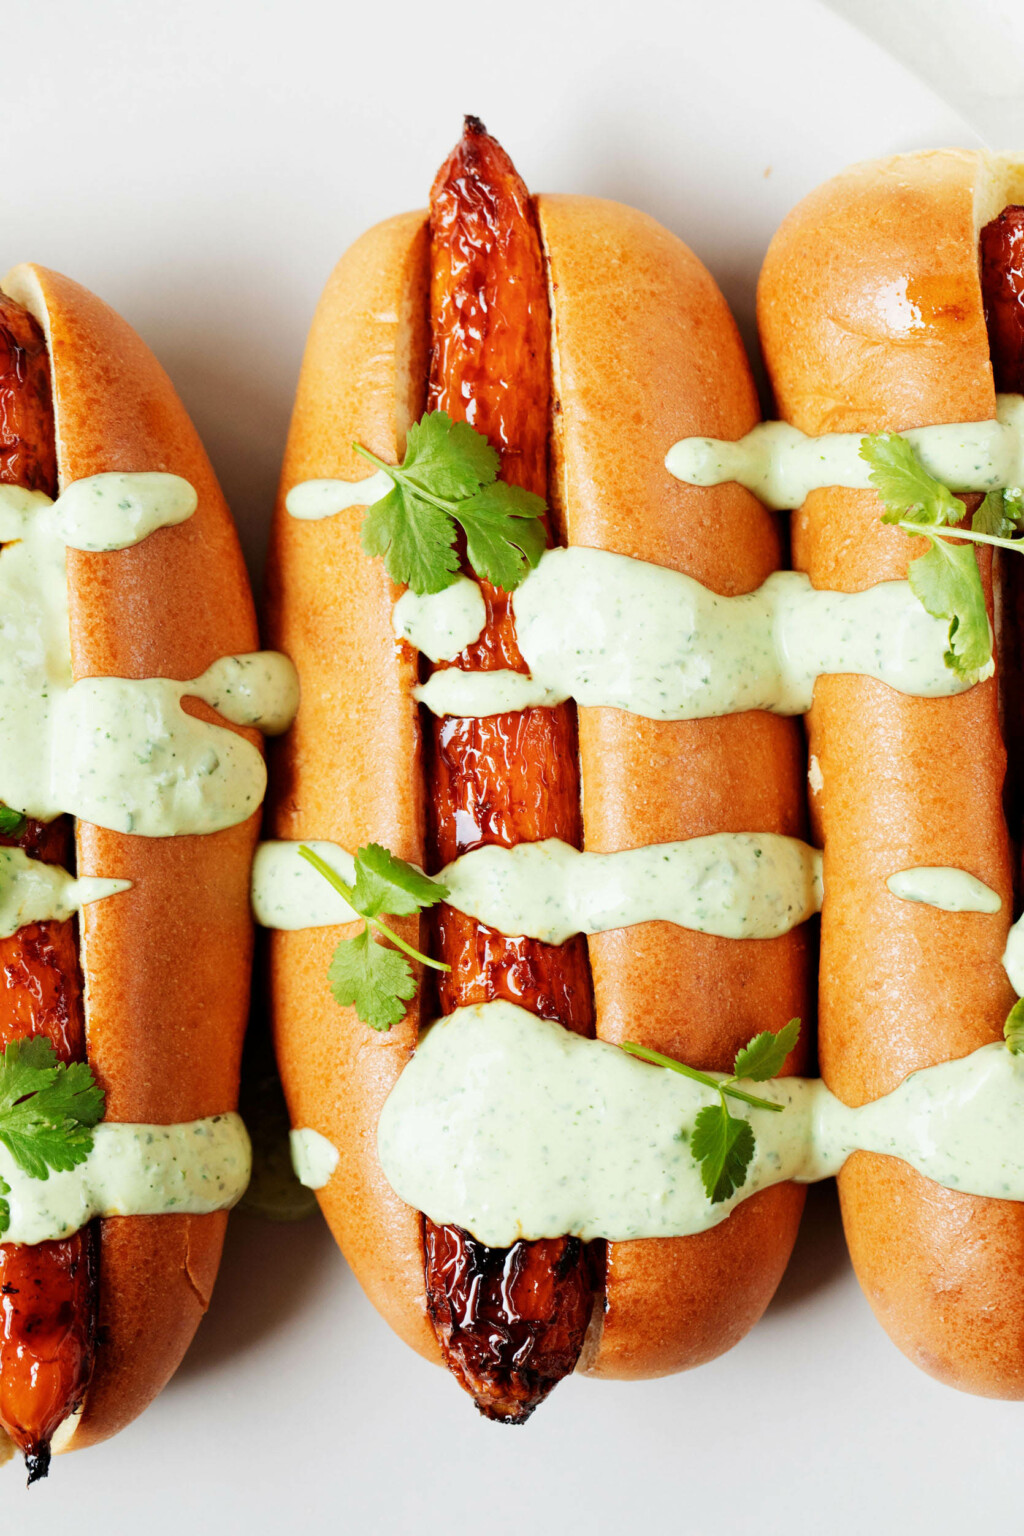 Glazed carrot dogs have been piled into buns and topped with a green dressing.